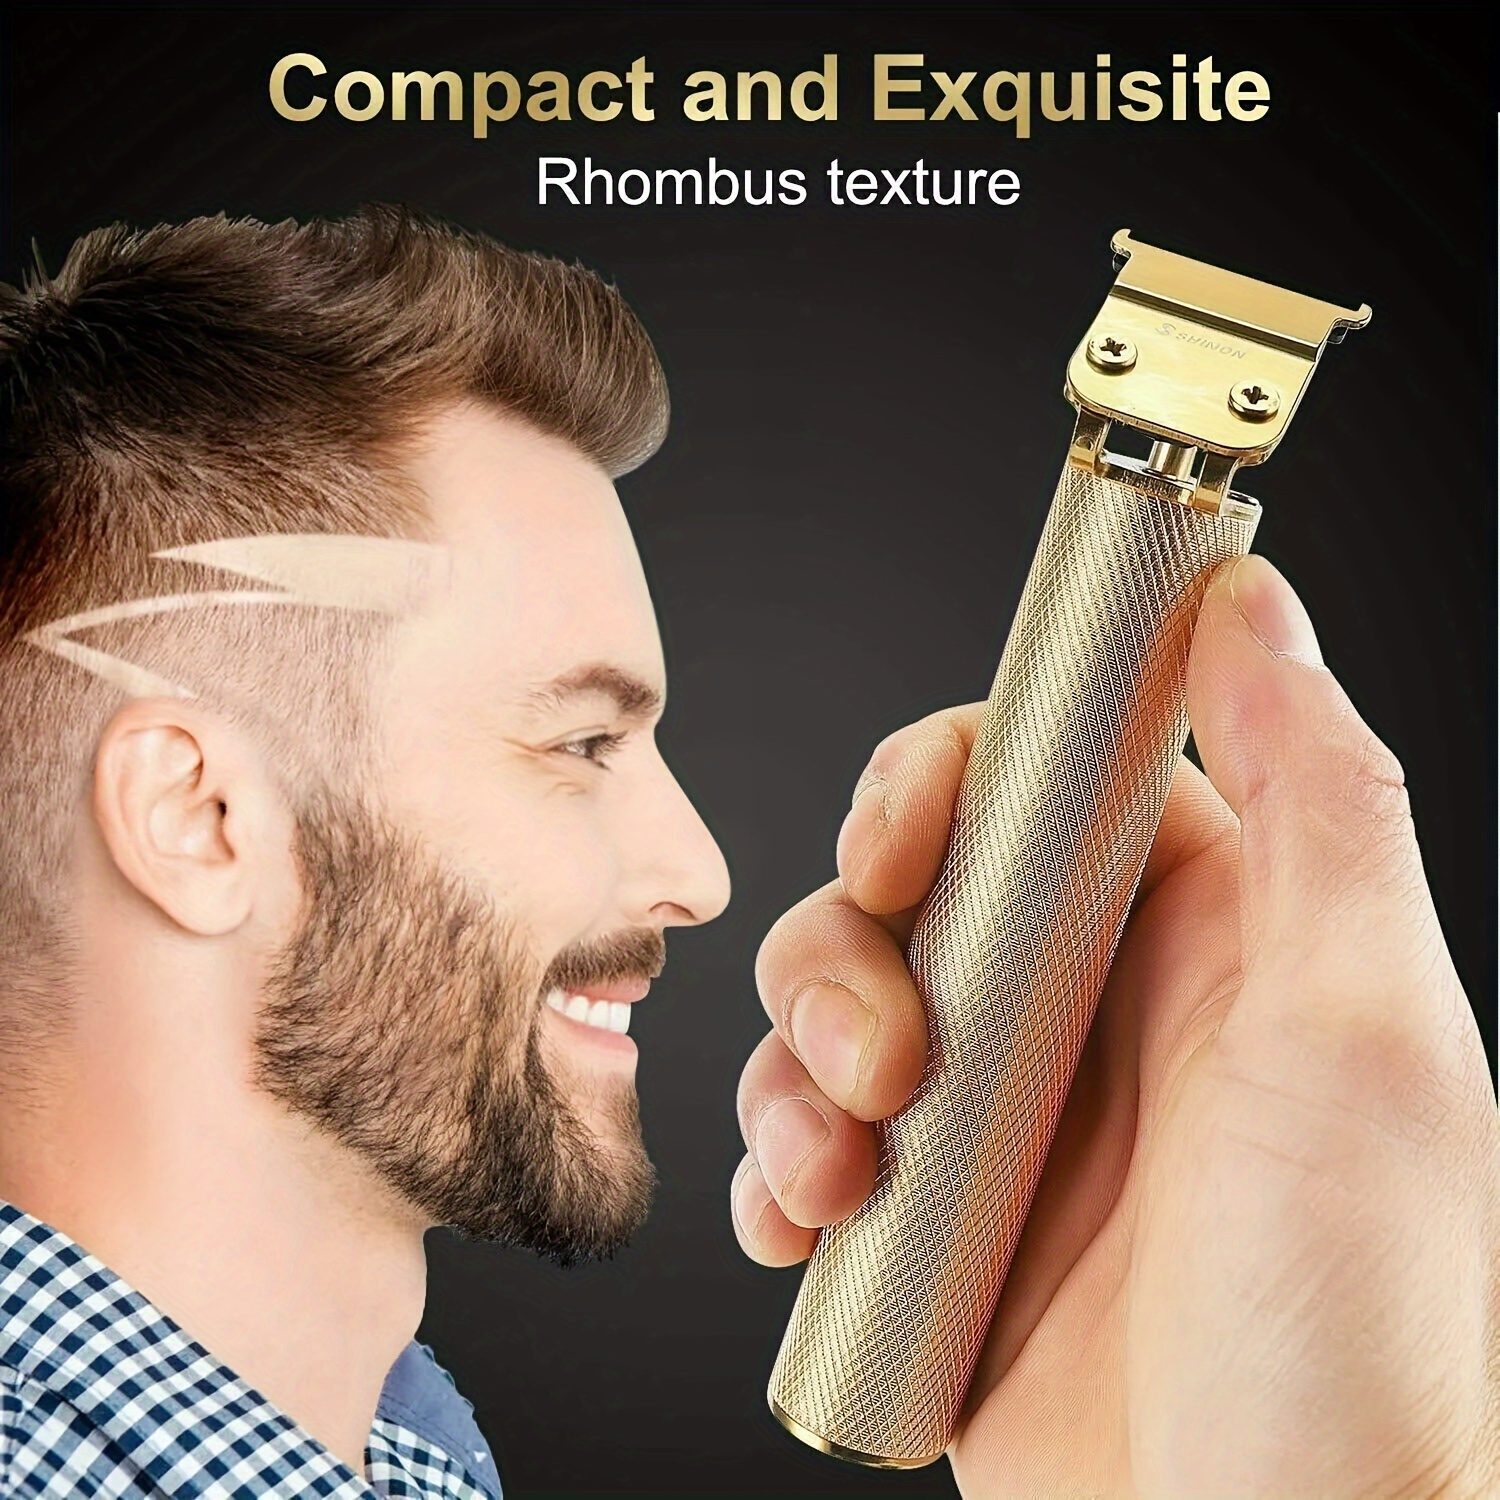 

Hair Clippers, Usb Rechargeable Hair Clippers And Beard Trimmers For Men, Precision T-blade Trimmer, Professional Trimmer Hair Clippers Cutting Beard Cordless Shaving Machine, Men's Grooming Kit